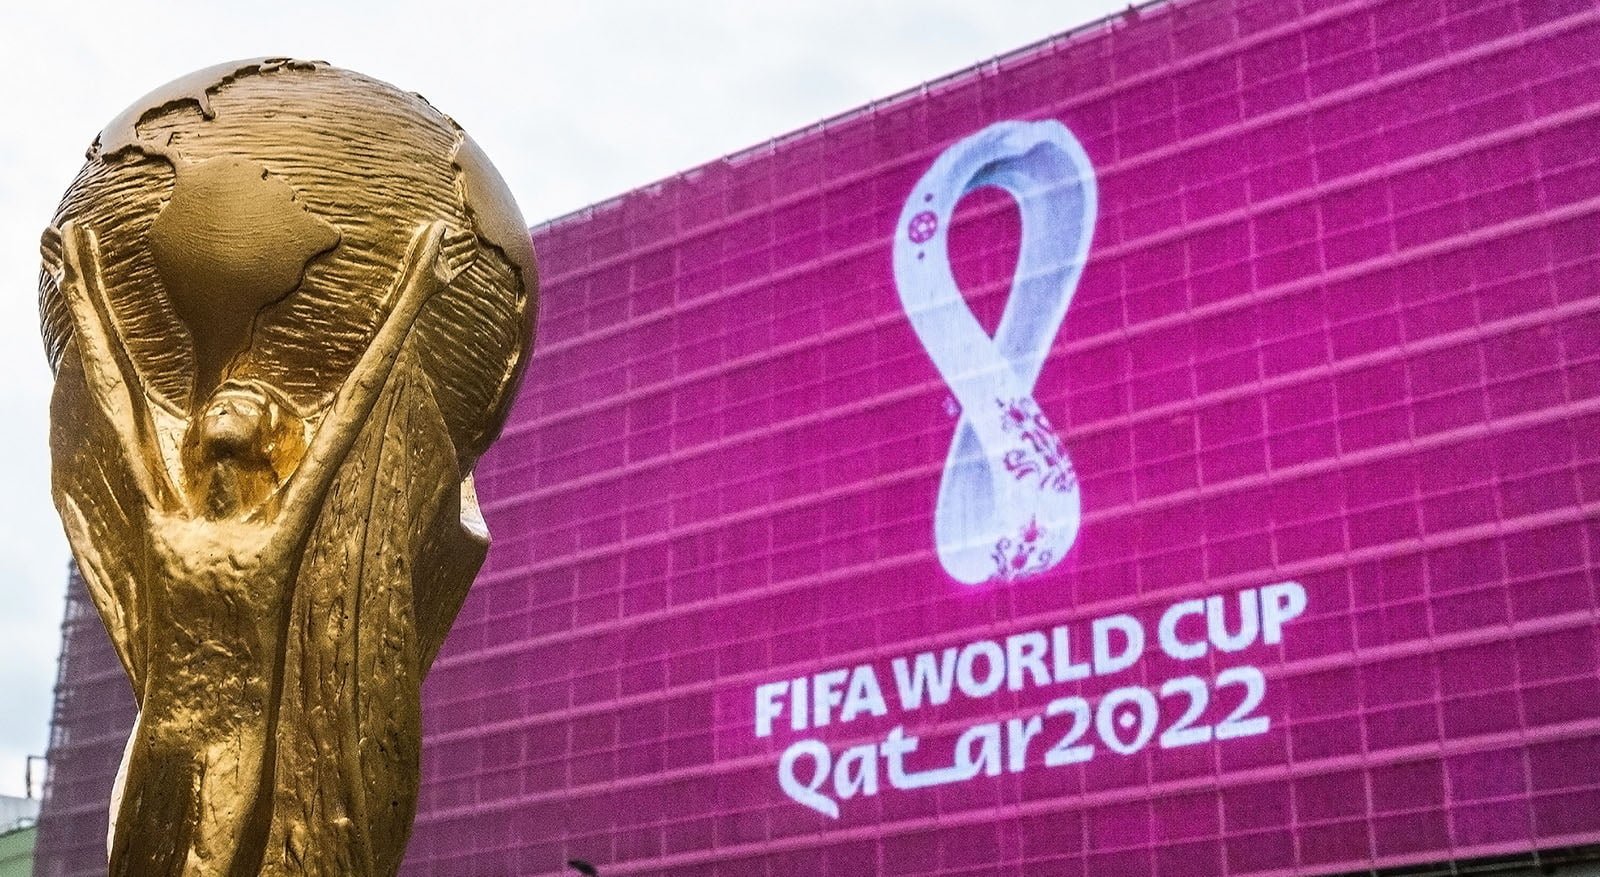 Thw 2022 World Cup will be held in Qatar